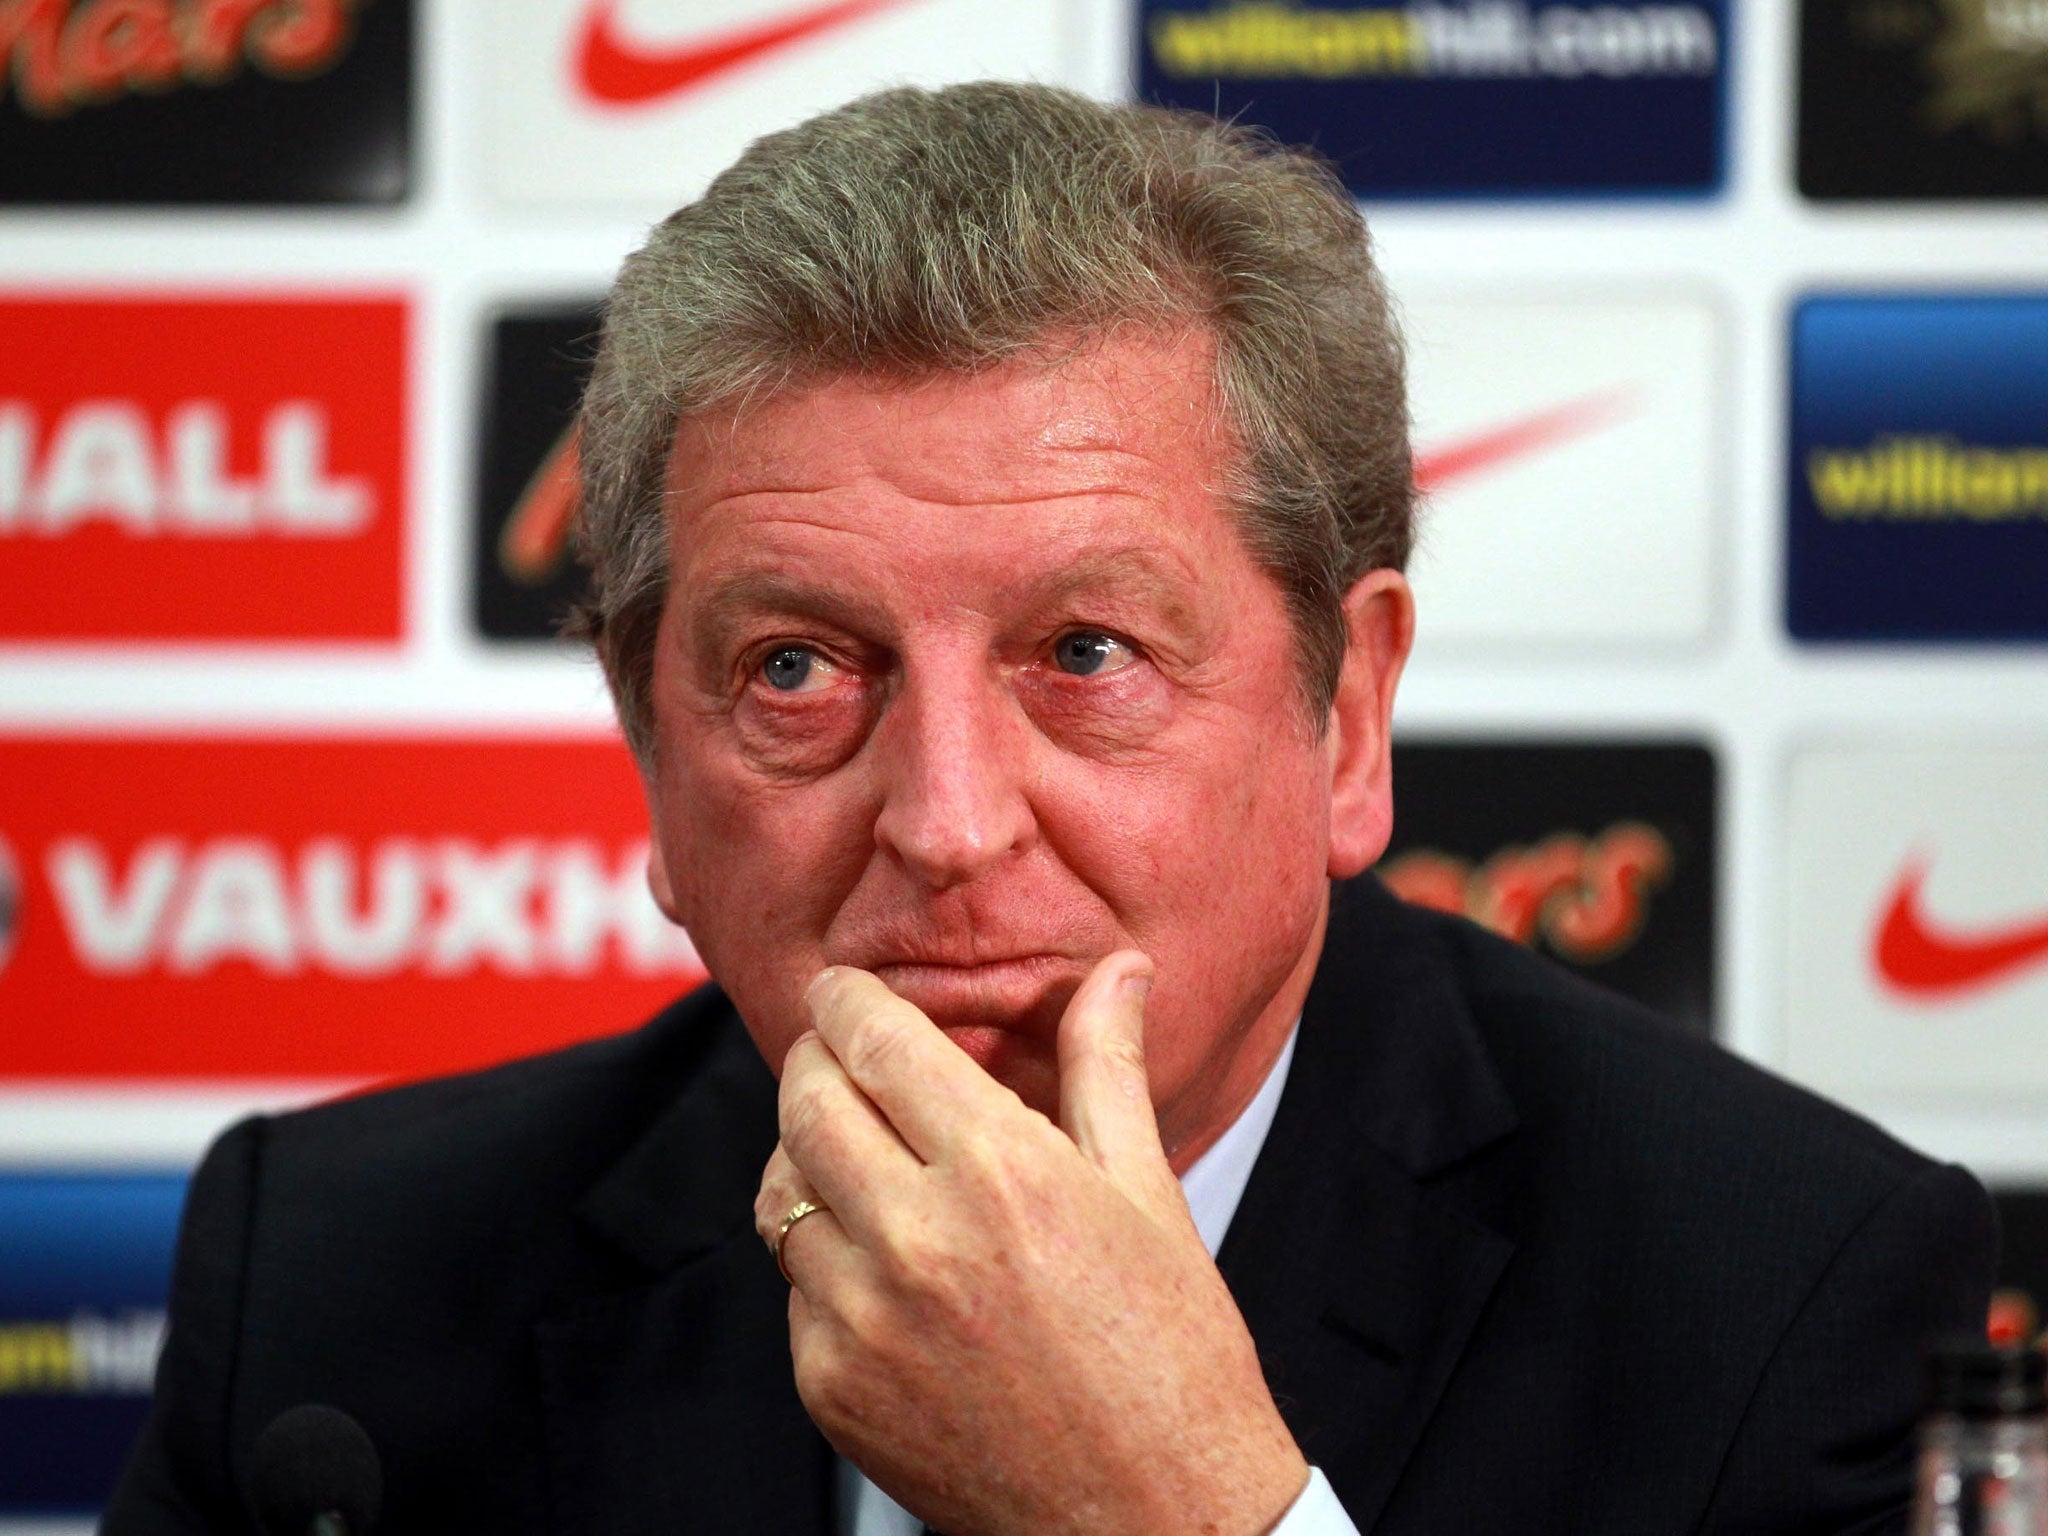 Roy Hodgson insisted that he has 'every faith' in Joe Hart continuing as England's No 1